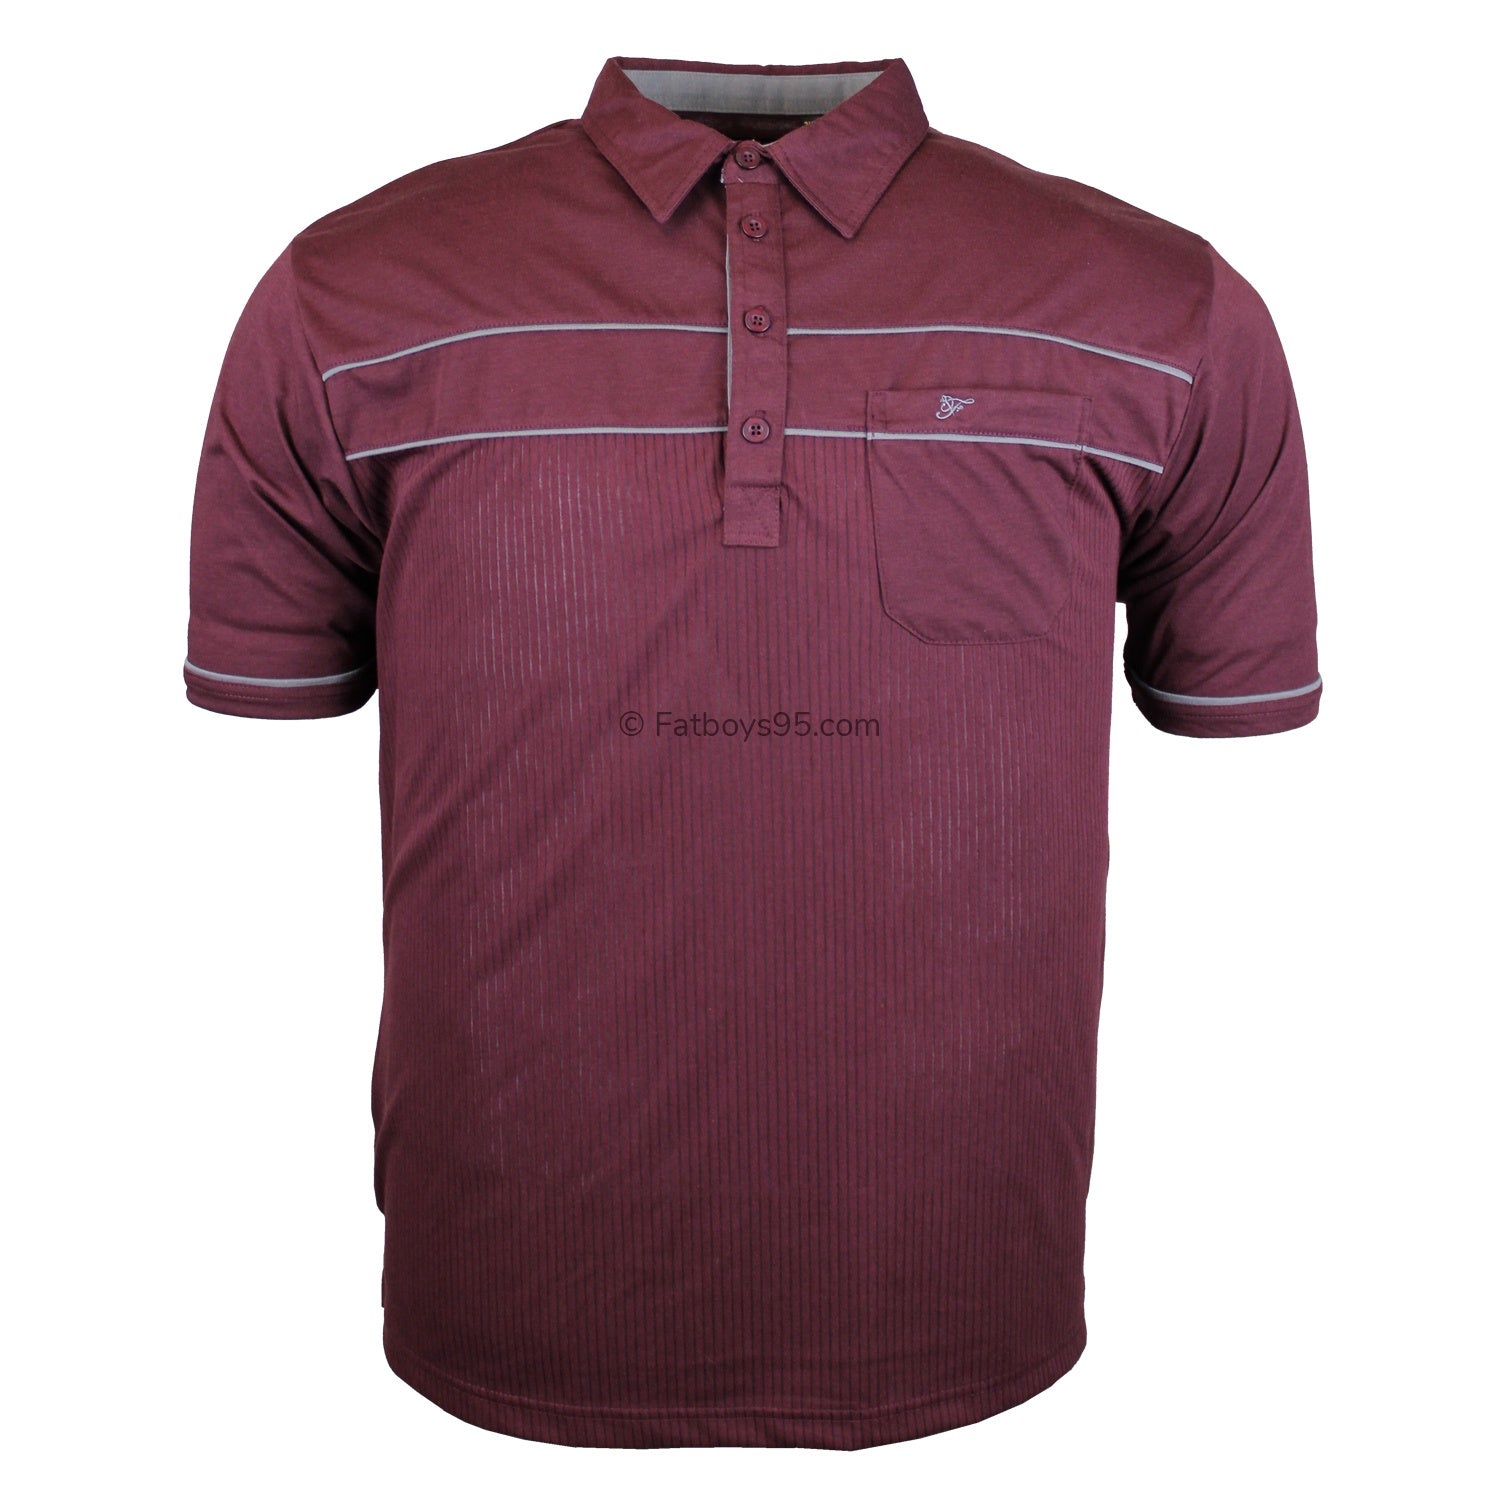 Forge Light Weight Panelled Golf Polo - FBS 420 - Wine 1